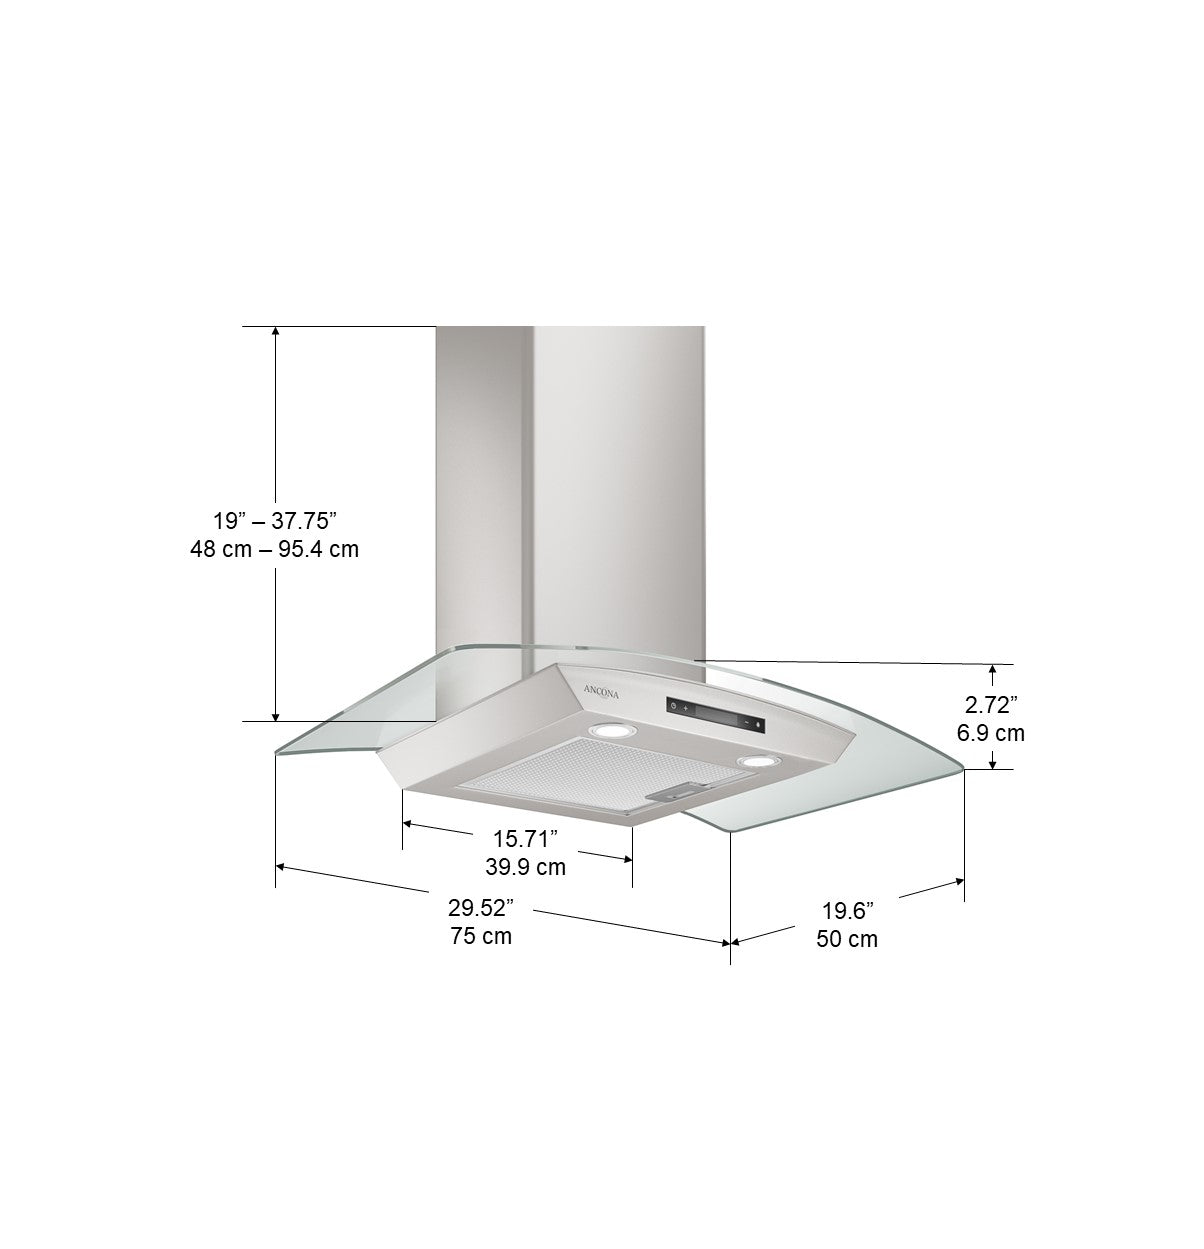 GCD430 30 in. Convertible Glass Canopy 400 CFM Ducted Wall Mount Range Hood